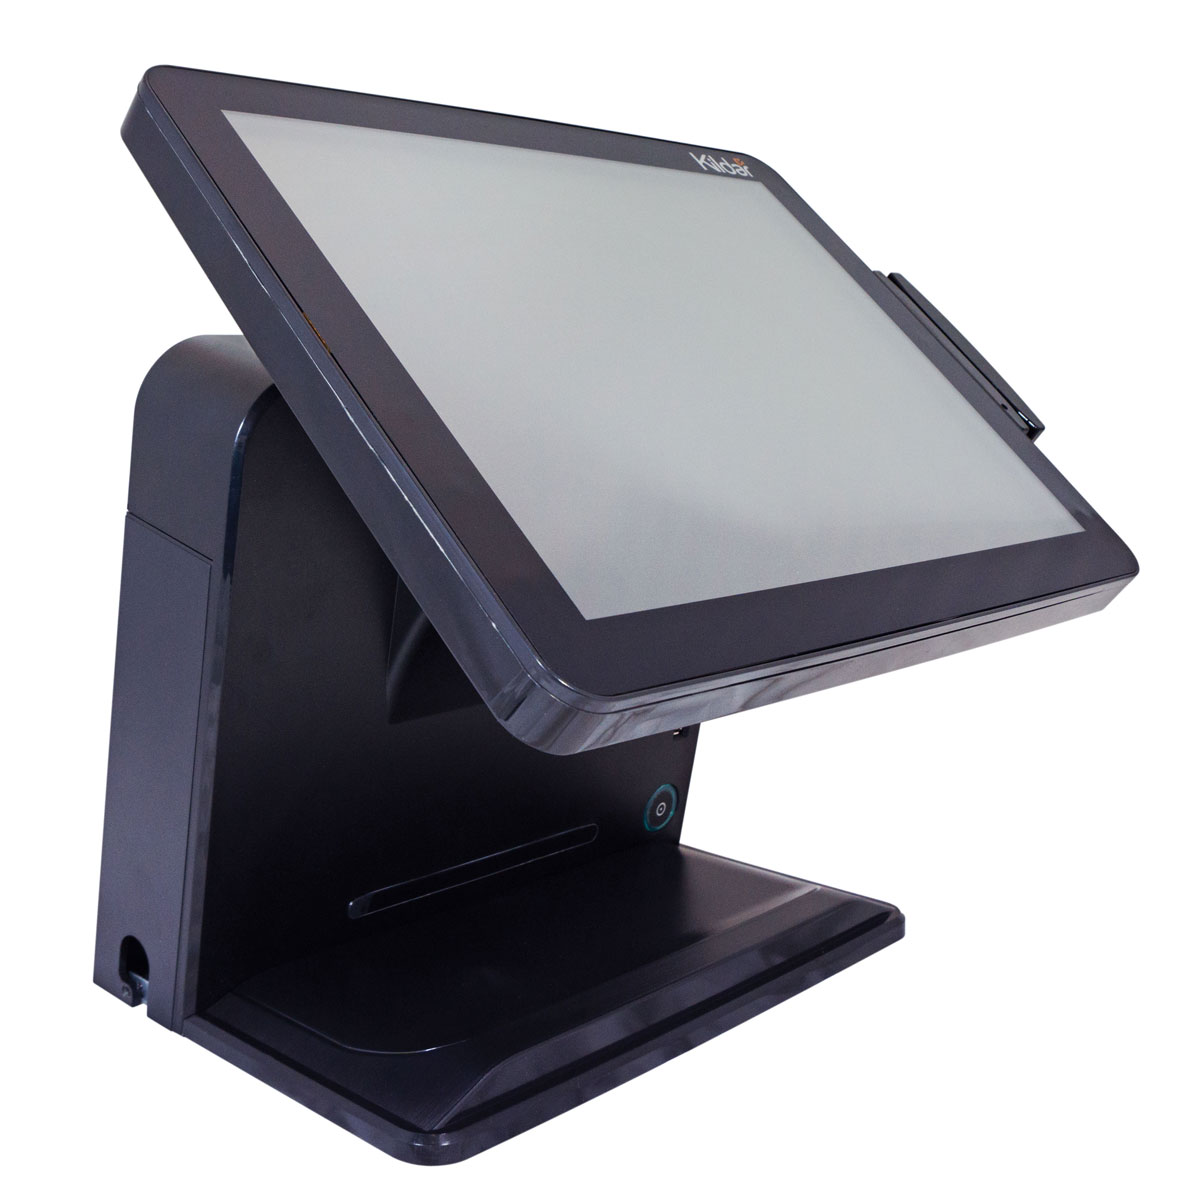 Kildar POS Touch screen Terminals DataTouch T1573